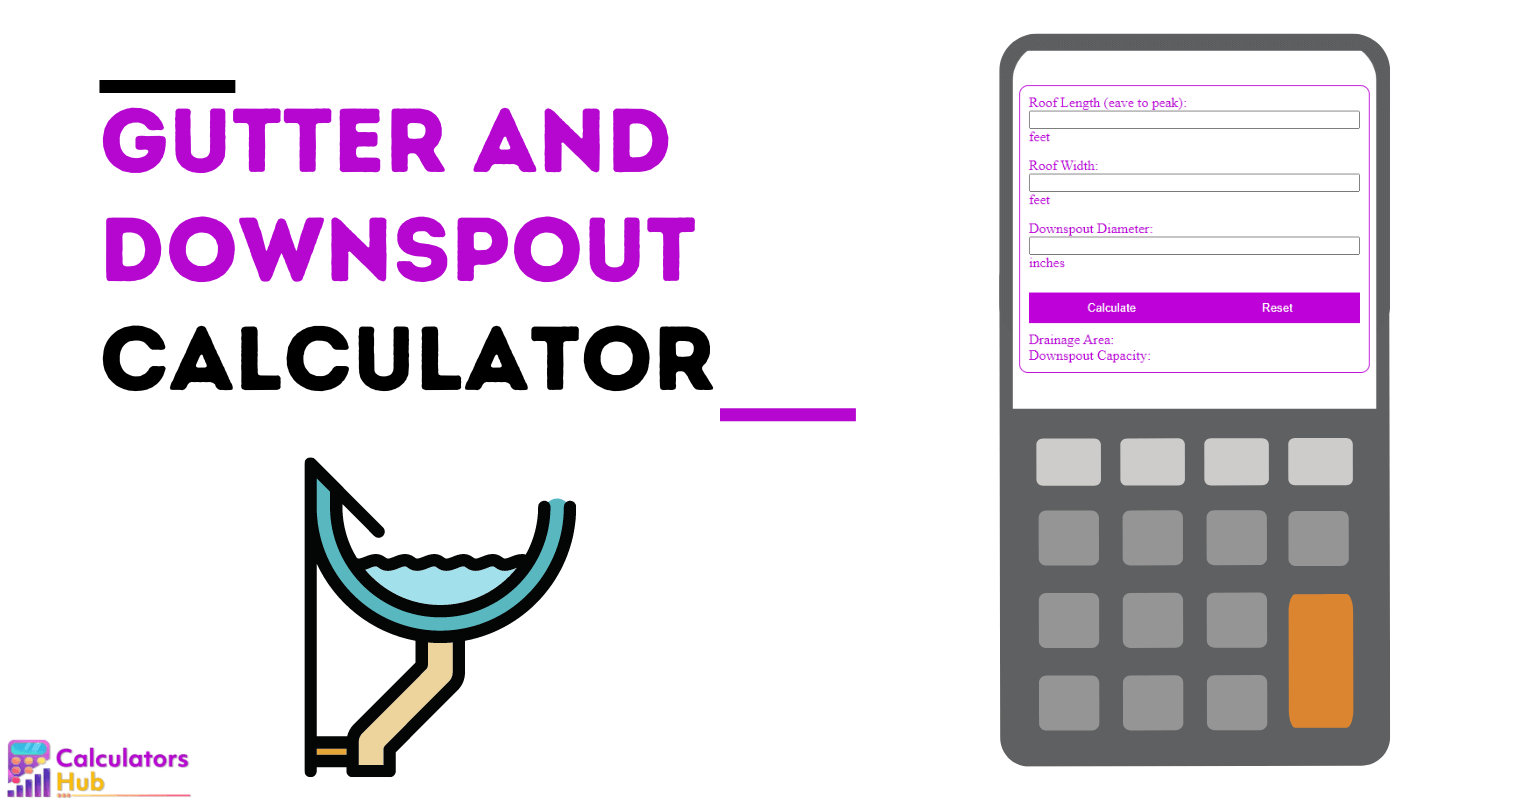 Gutter and Downspout Calculator